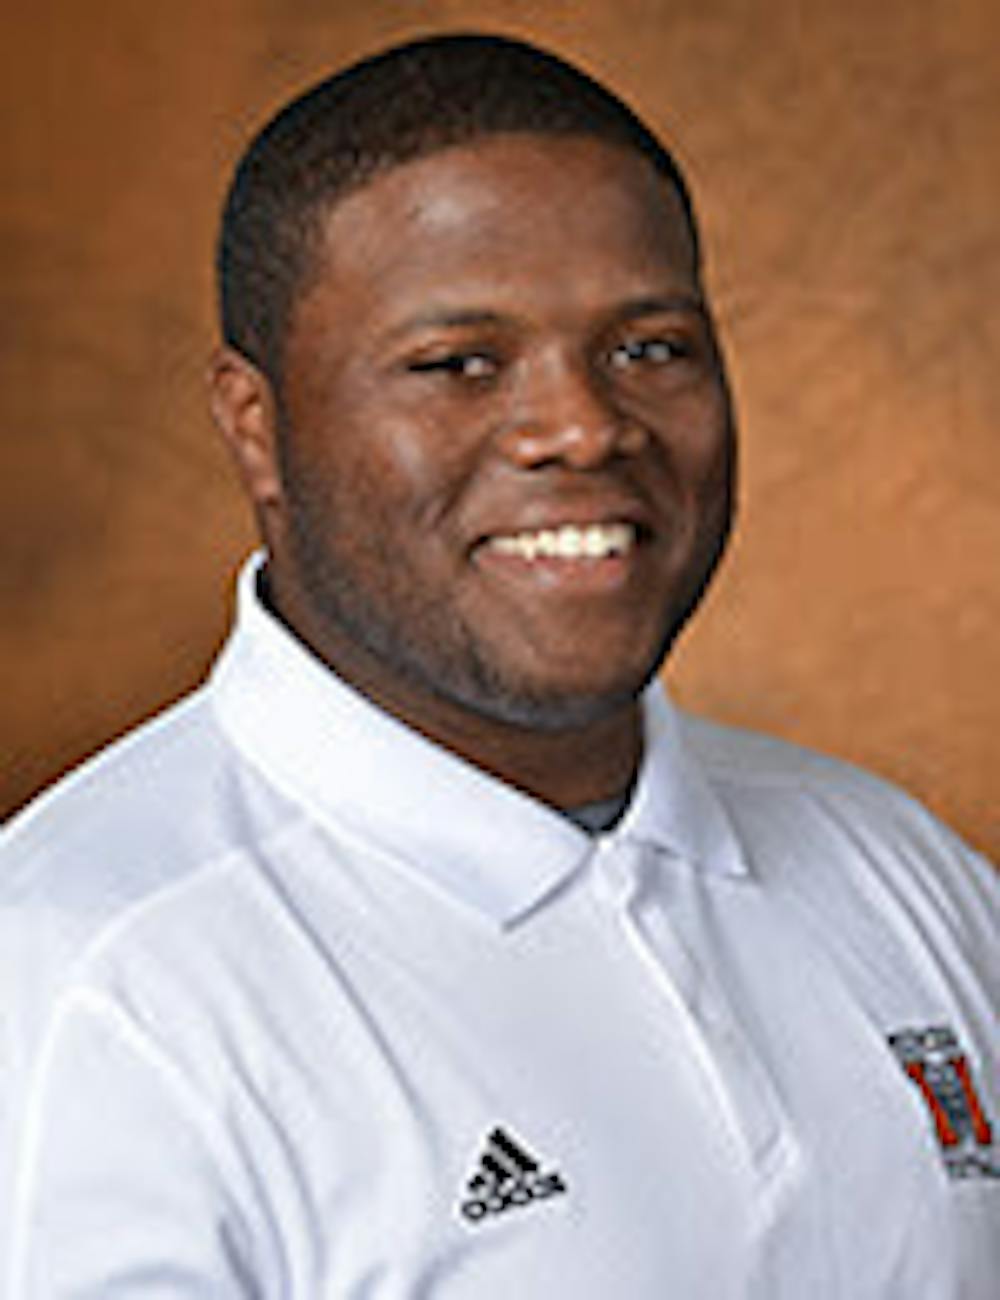 Mercer University's Justin Brown, sports chaplain for the football team, will be the guest speaker at the event Friday.